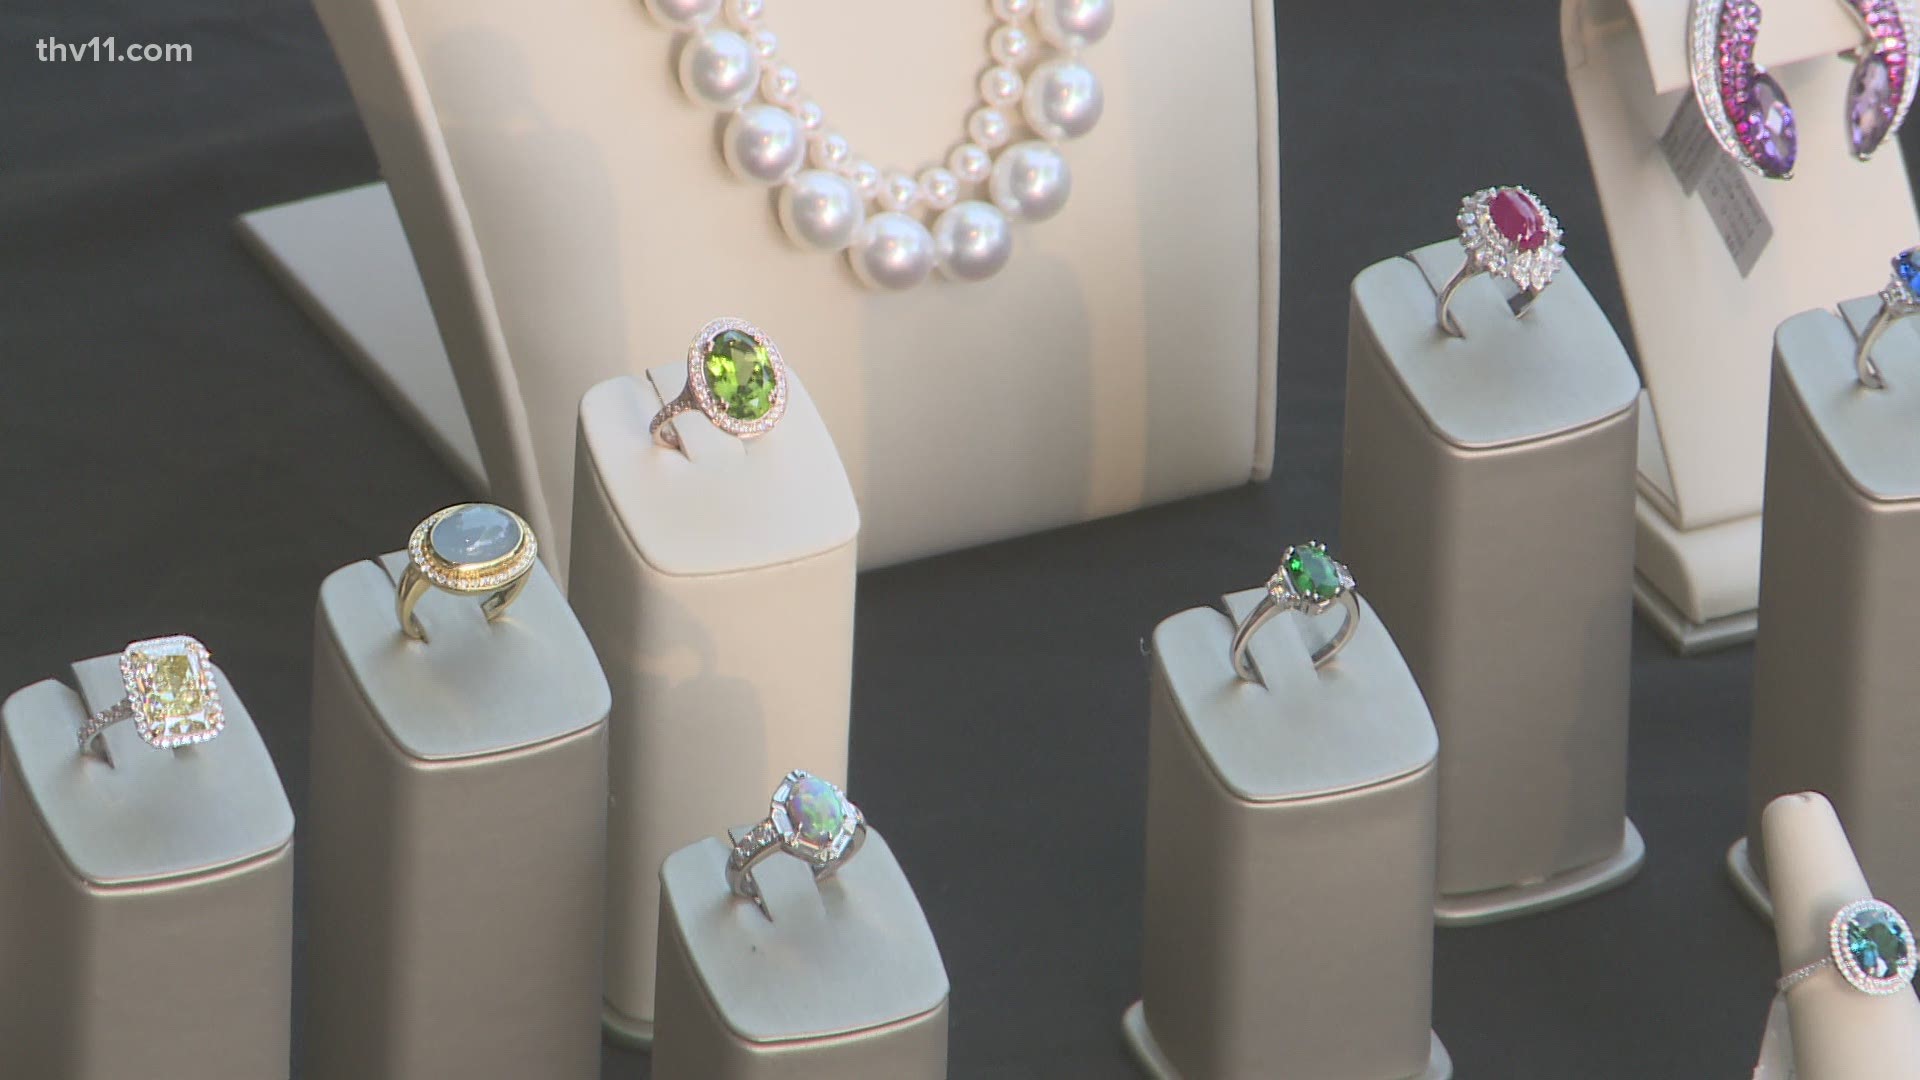 Jim Engelhorn with Sissy's Log Cabin shares jewelry selections that will dazzle any mom this Mother’s Day.